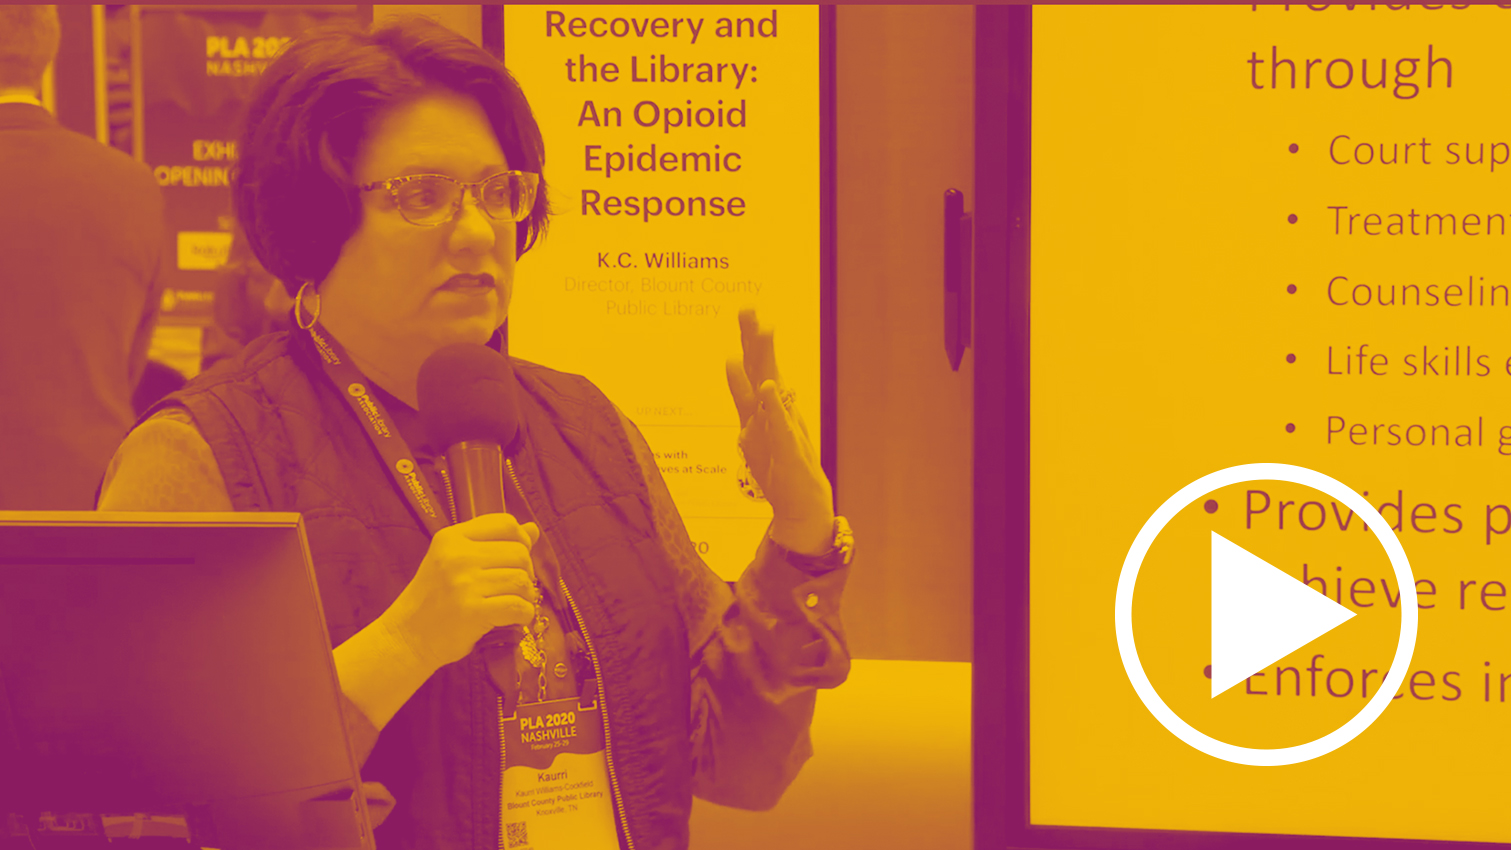 Video: Recovery and the Library: An Opioid Epidemic Response